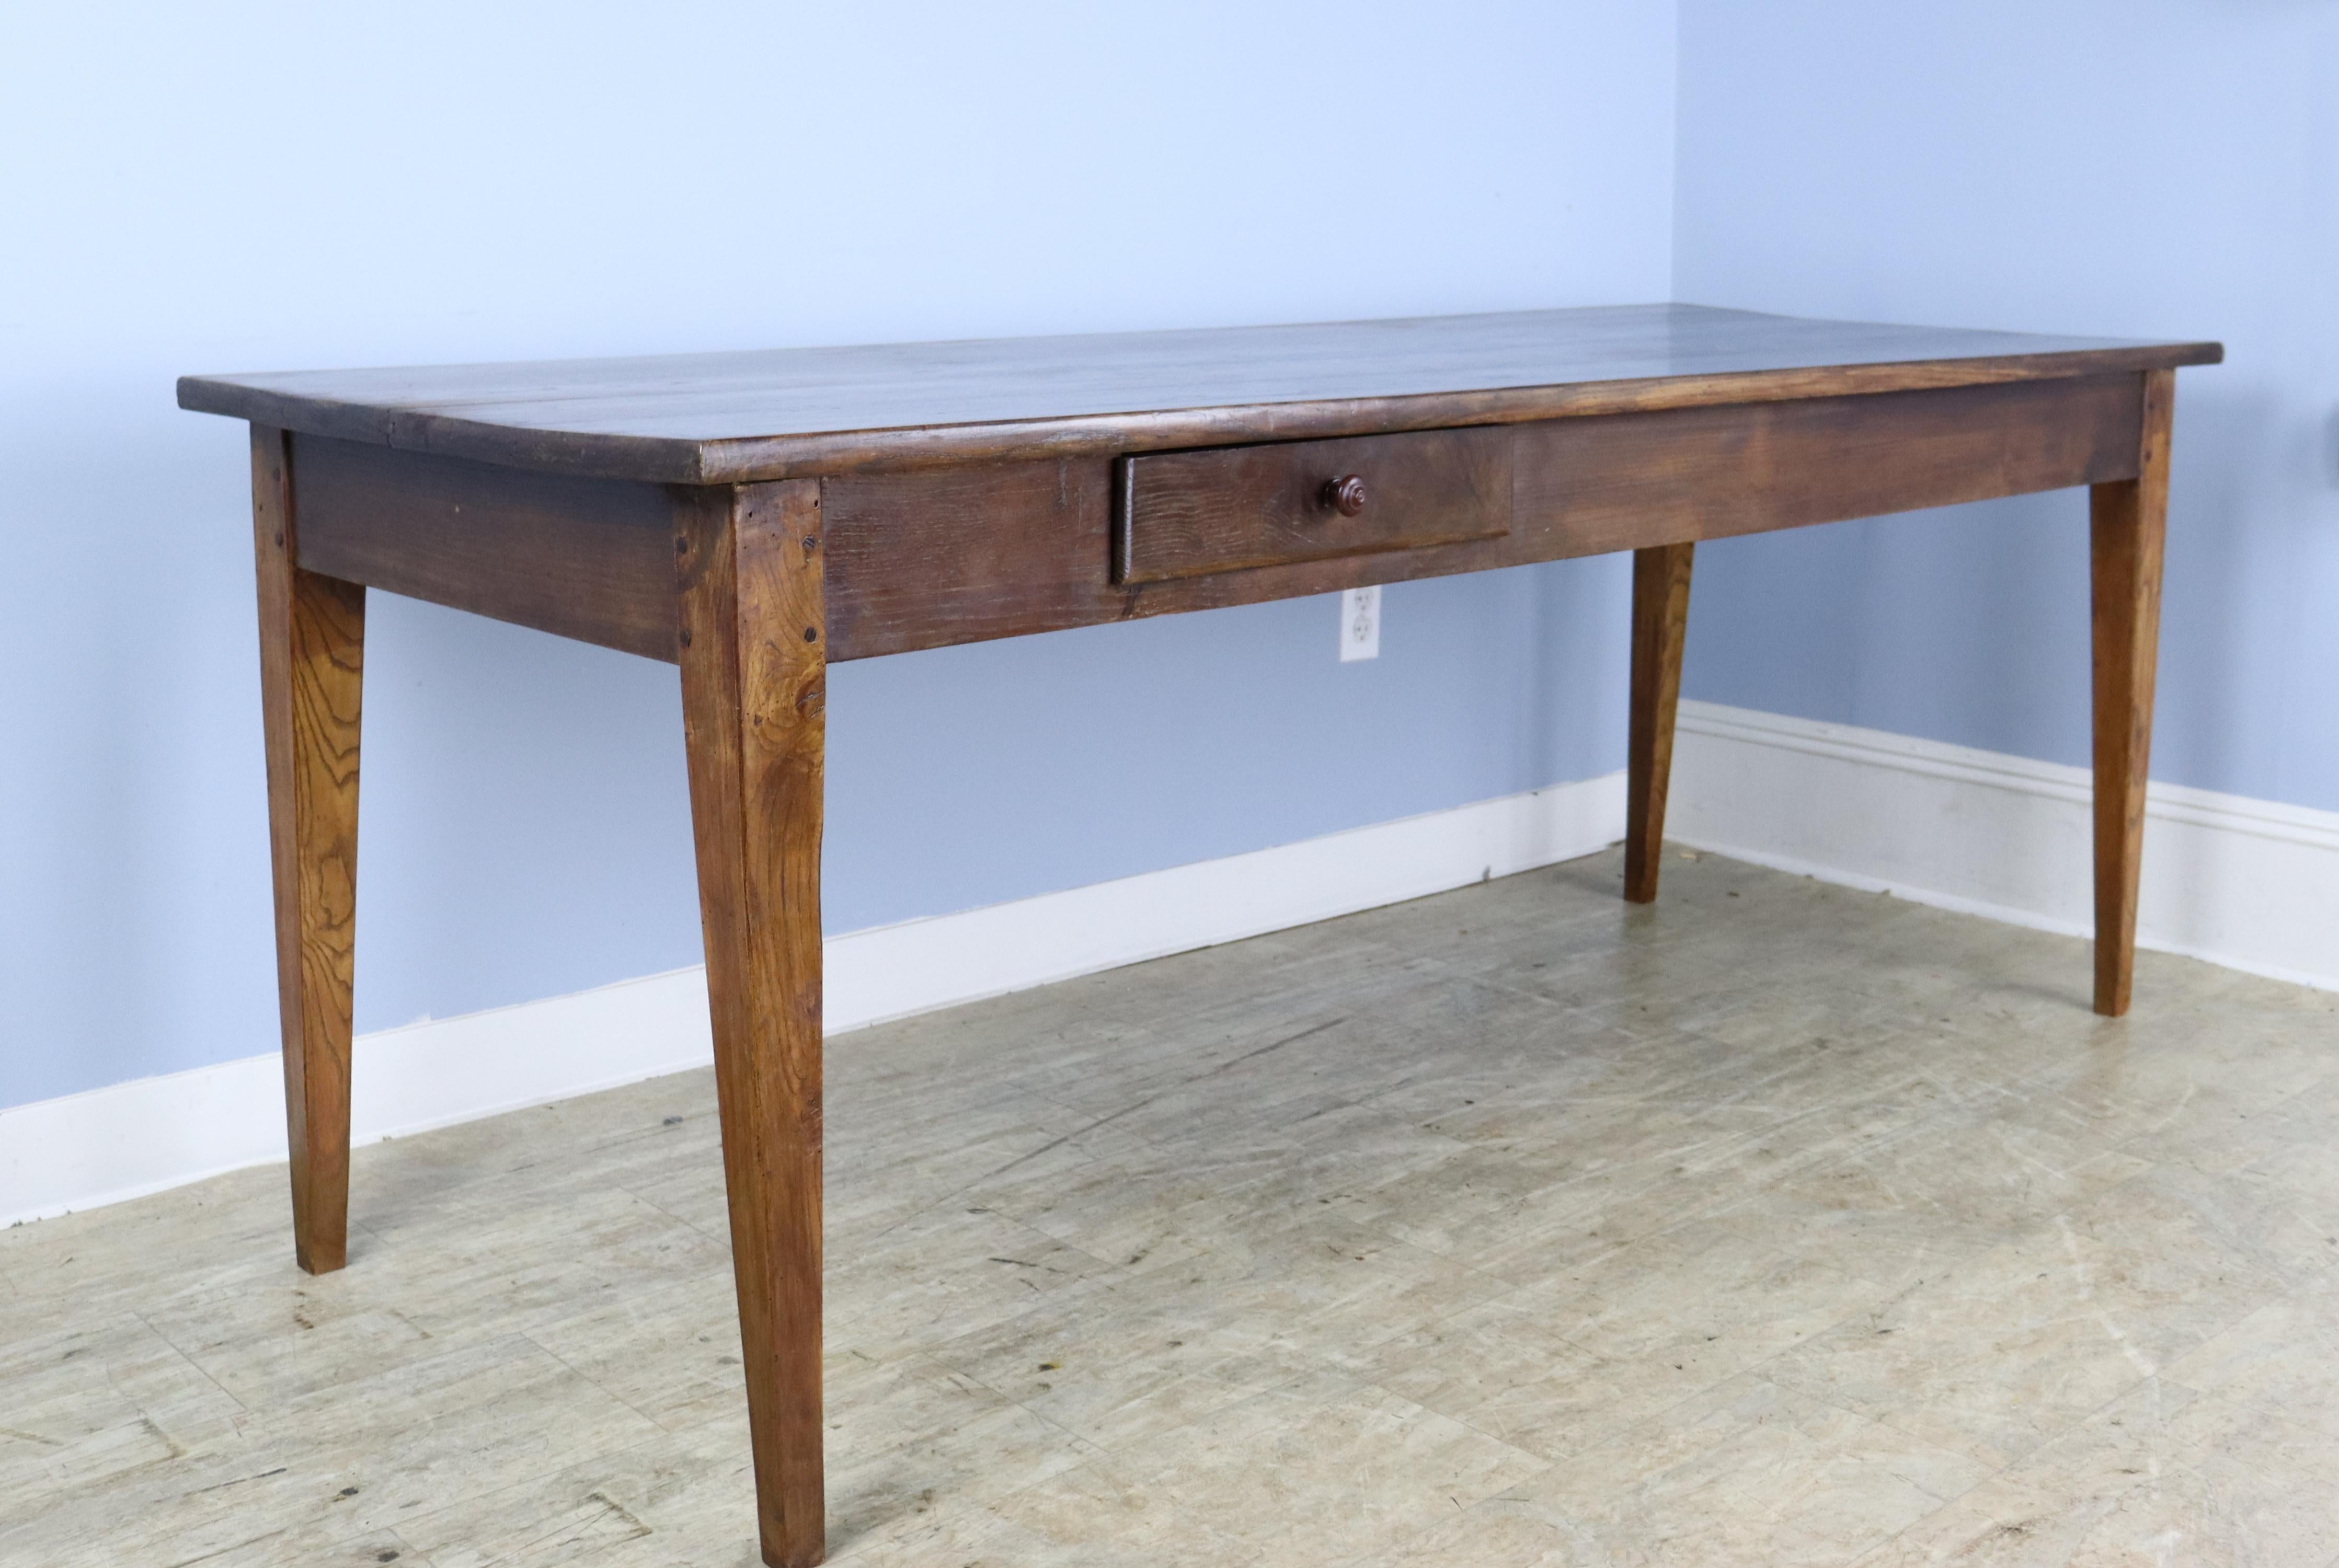 An elegant chestnut farm table with a single offset drawer and a useful bread slide. Well grained tapered legs, pegged at the apron. 24 inch apron height is good for knees and there are 70.5 inches between the legs on the long side. The top is in